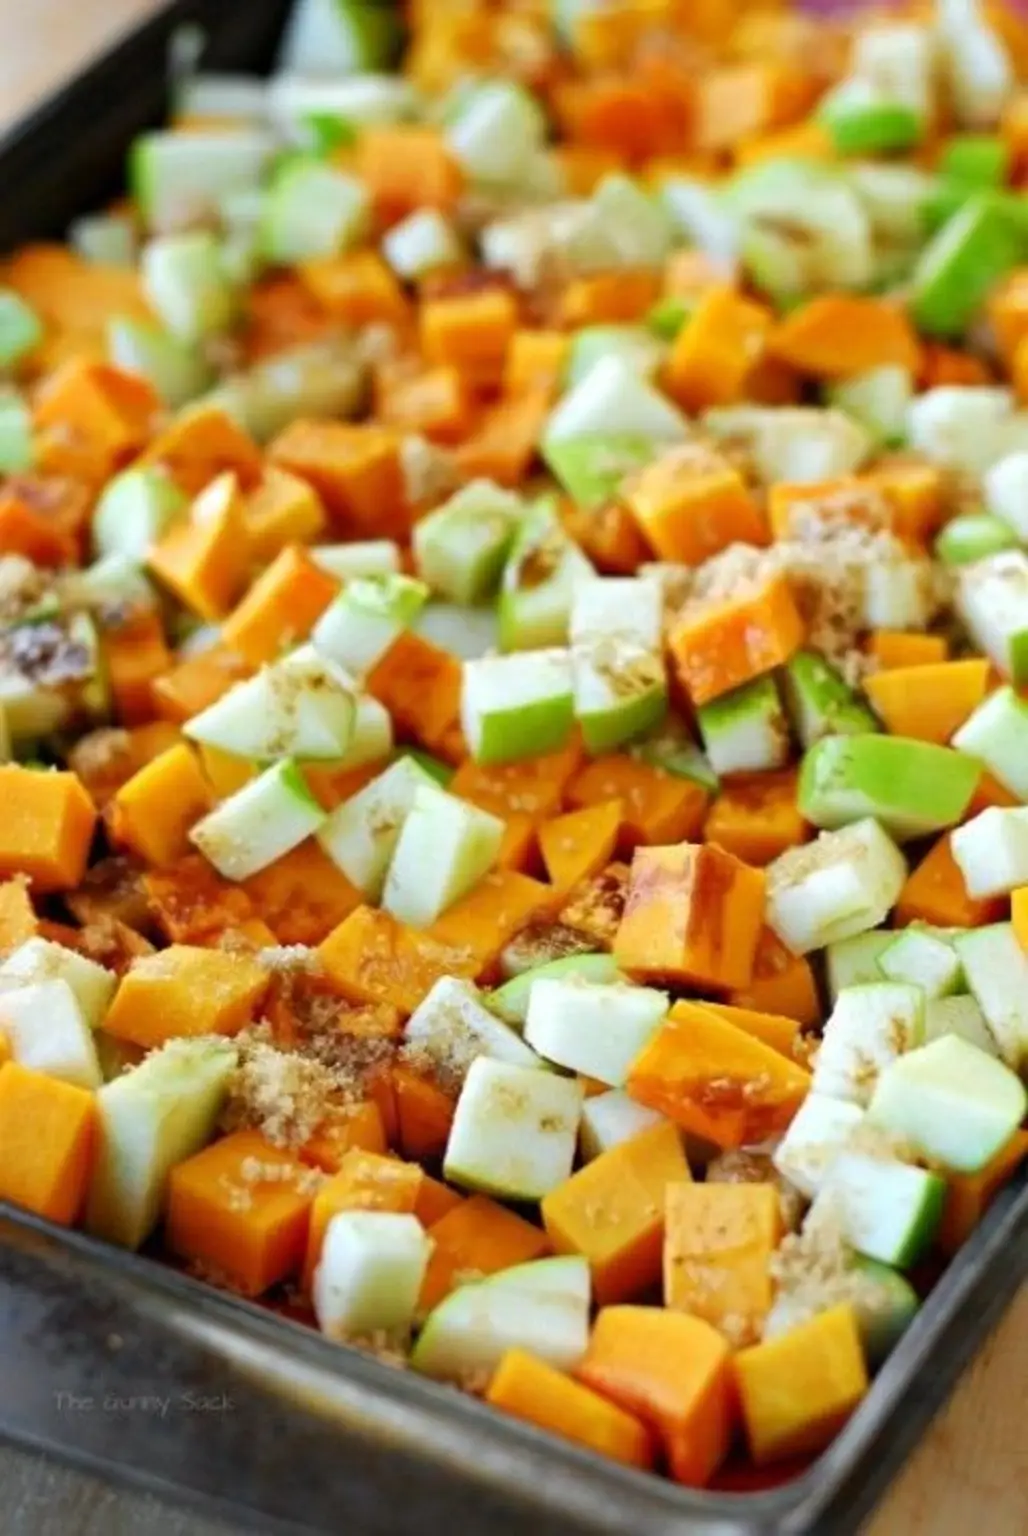 Roasted Butternut Squash with Green Apples and Candied Walnuts